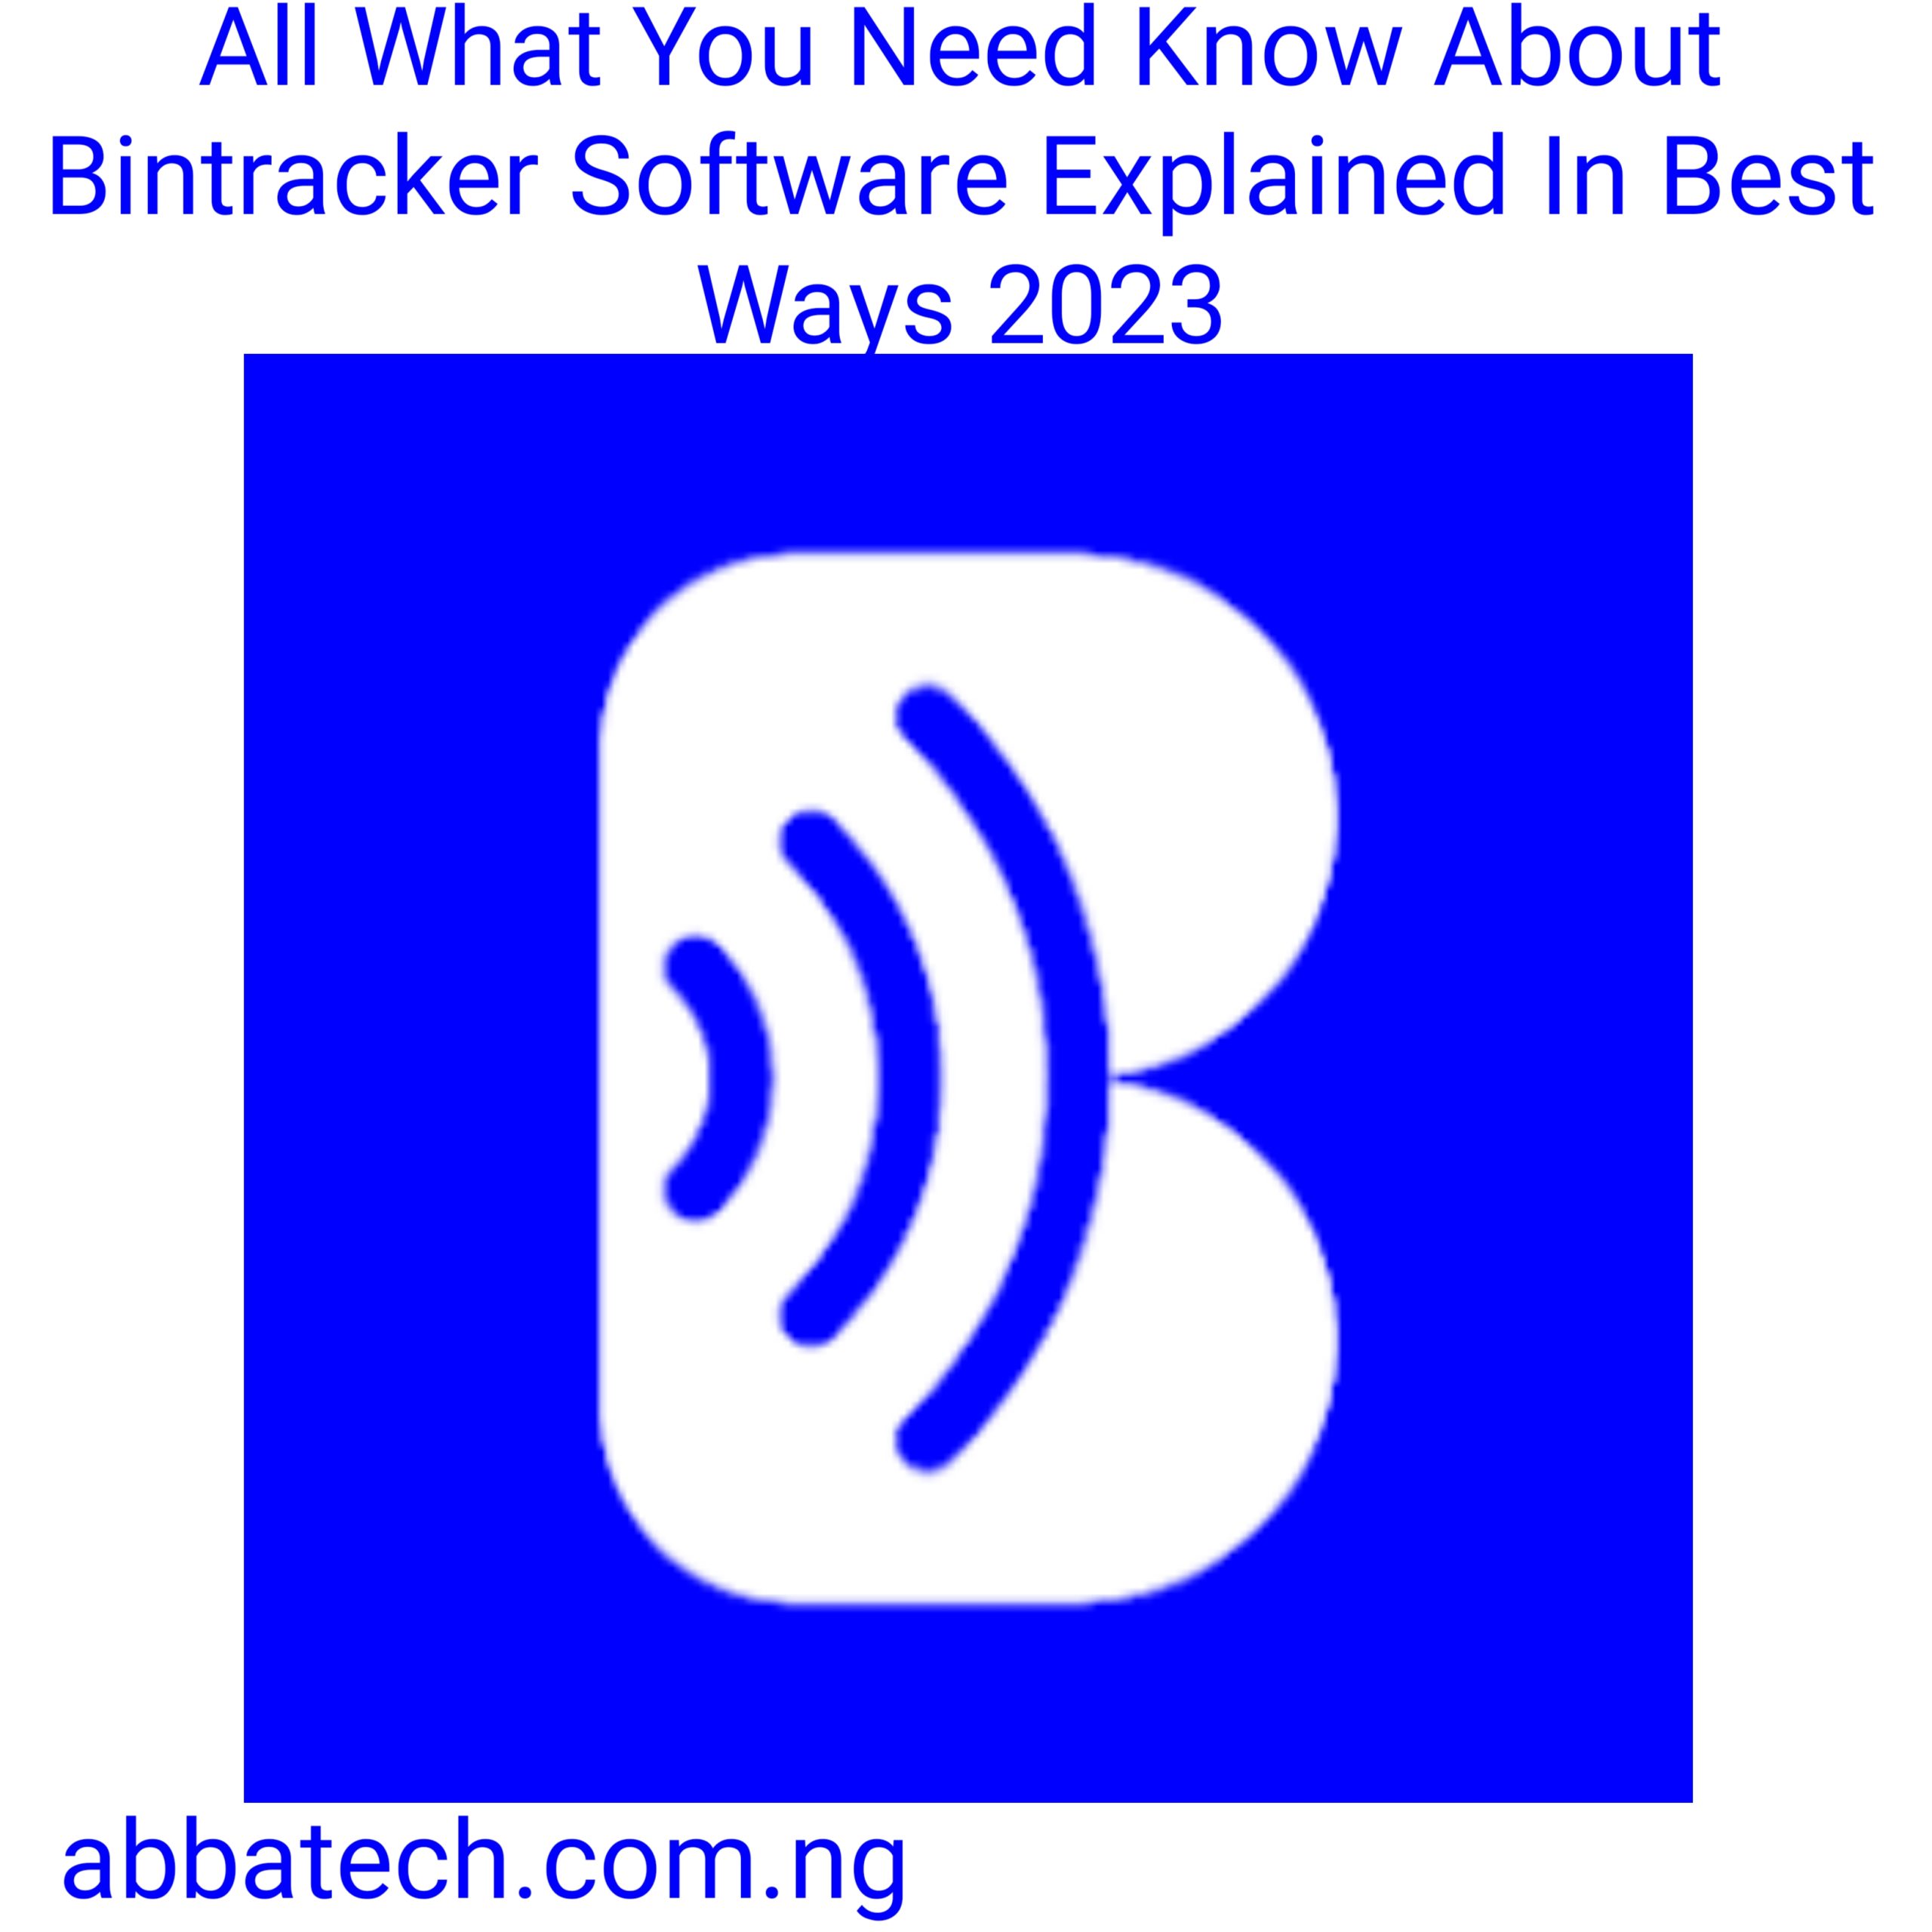 All What You Need Know About Bintracker Software Explained In Best Ways 2023